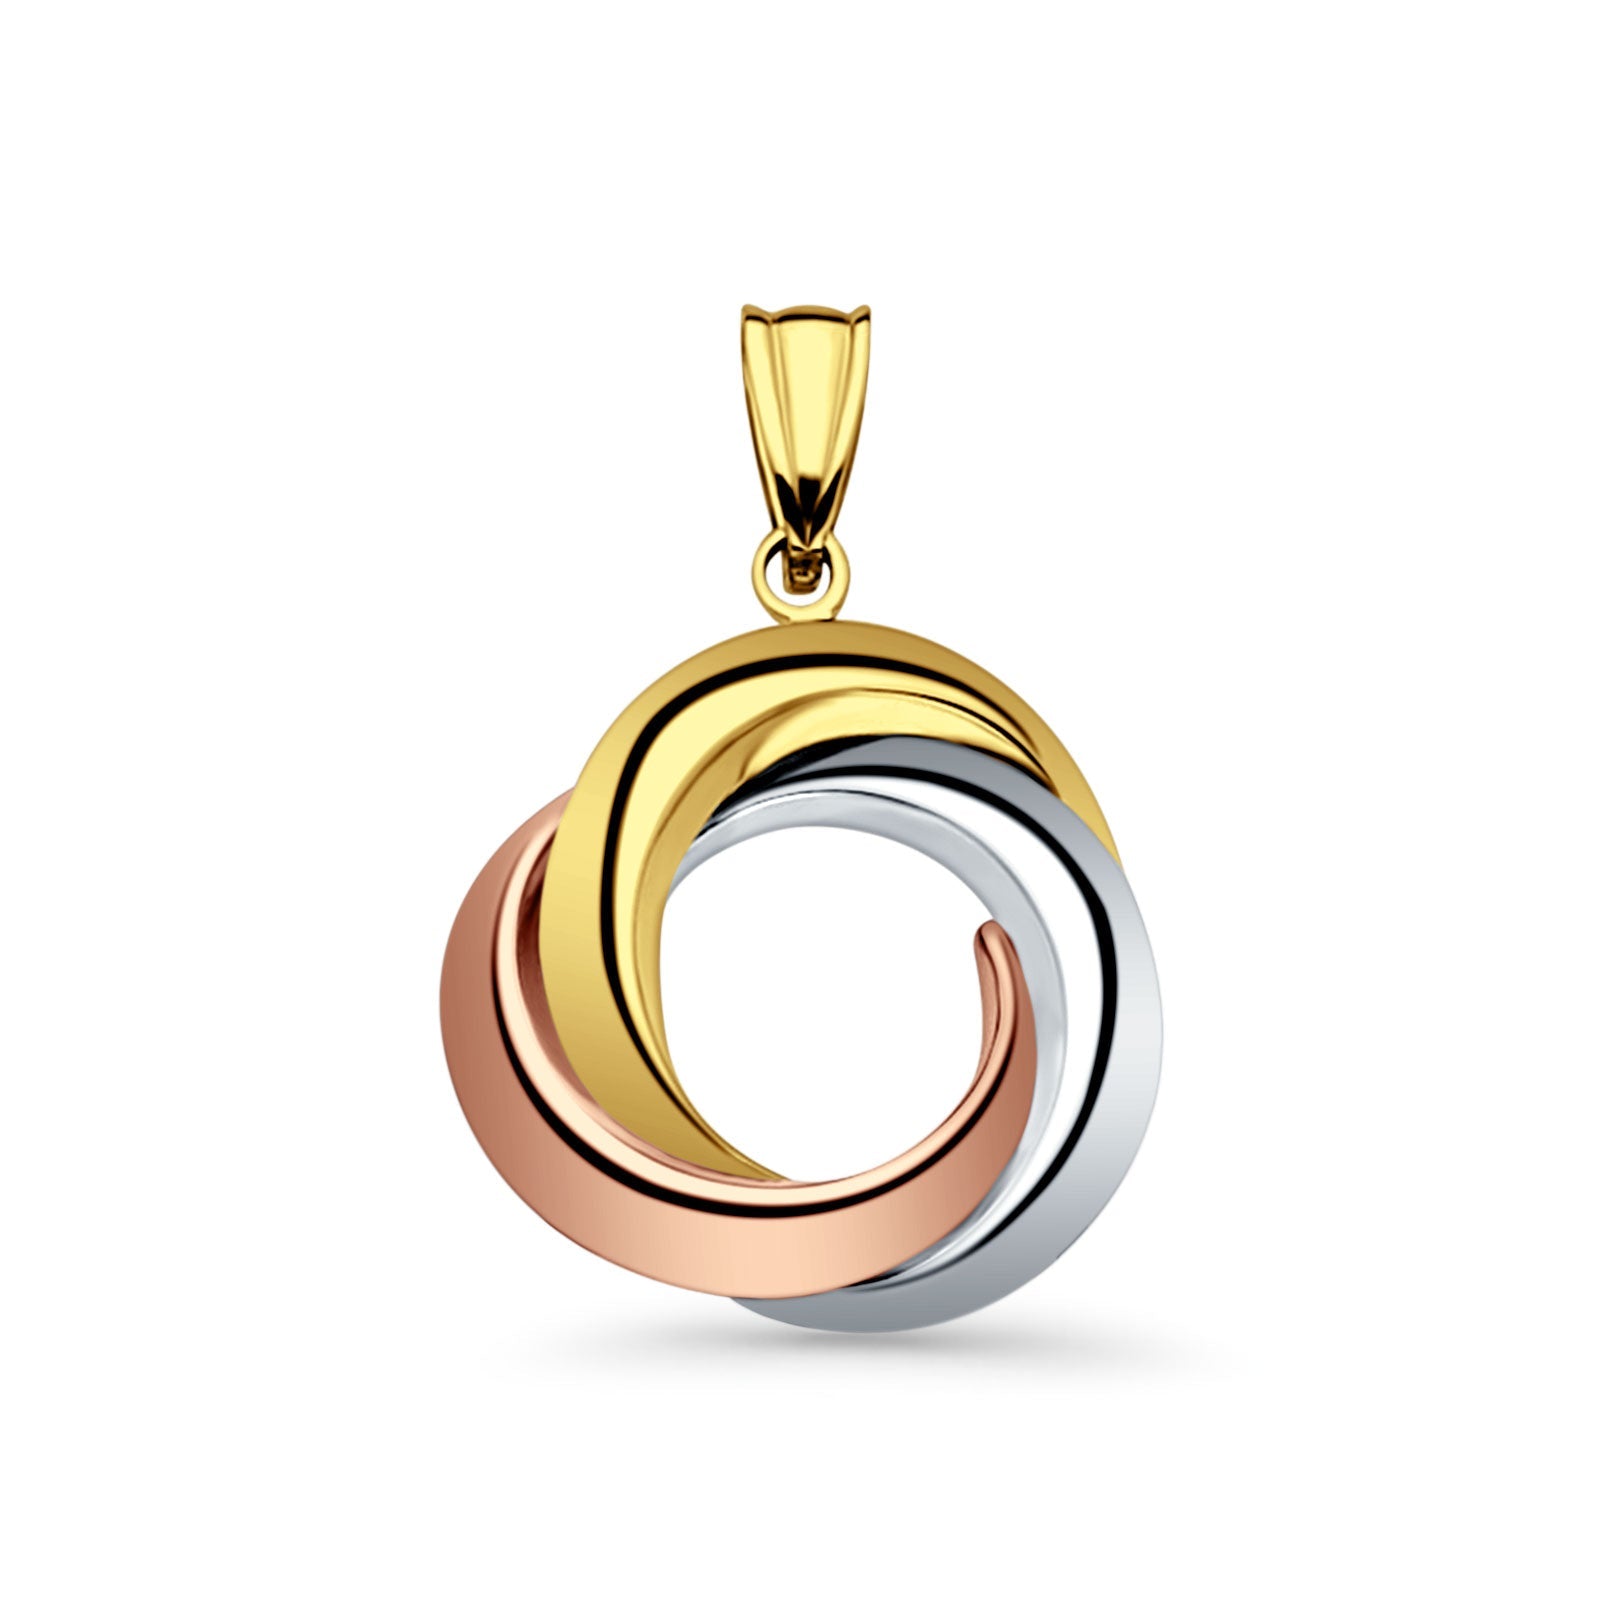 14K Tri Color Gold 3 Round Infinity Pendant 26mmX20mm With 16 Inch To 22 Inch 1.2MM Width Angle Cut Oval Rolo Chain Necklace